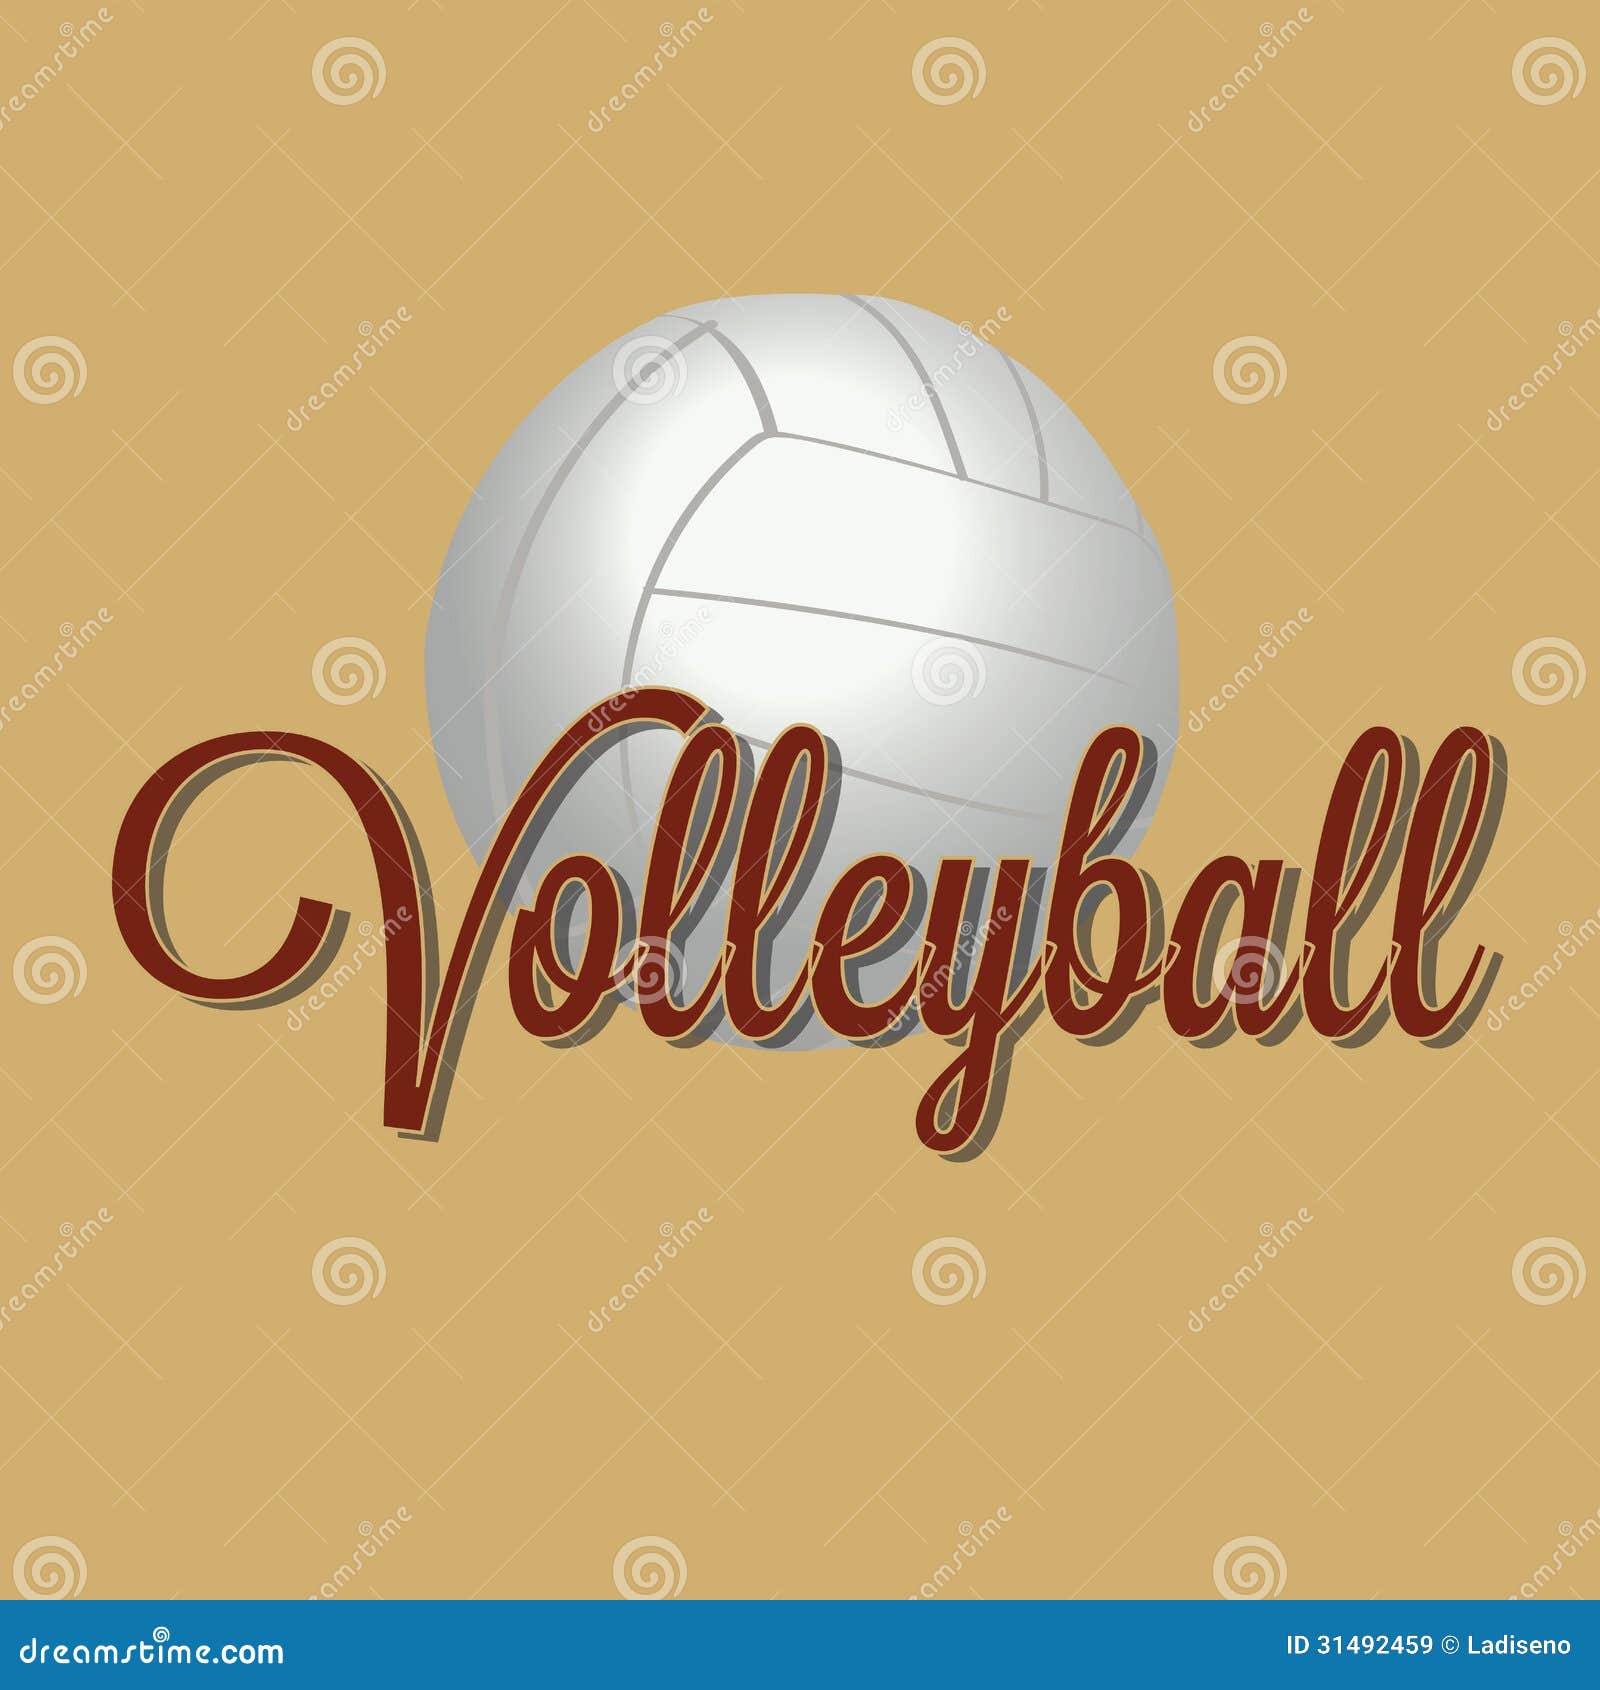 volleyball clipart no background - photo #42